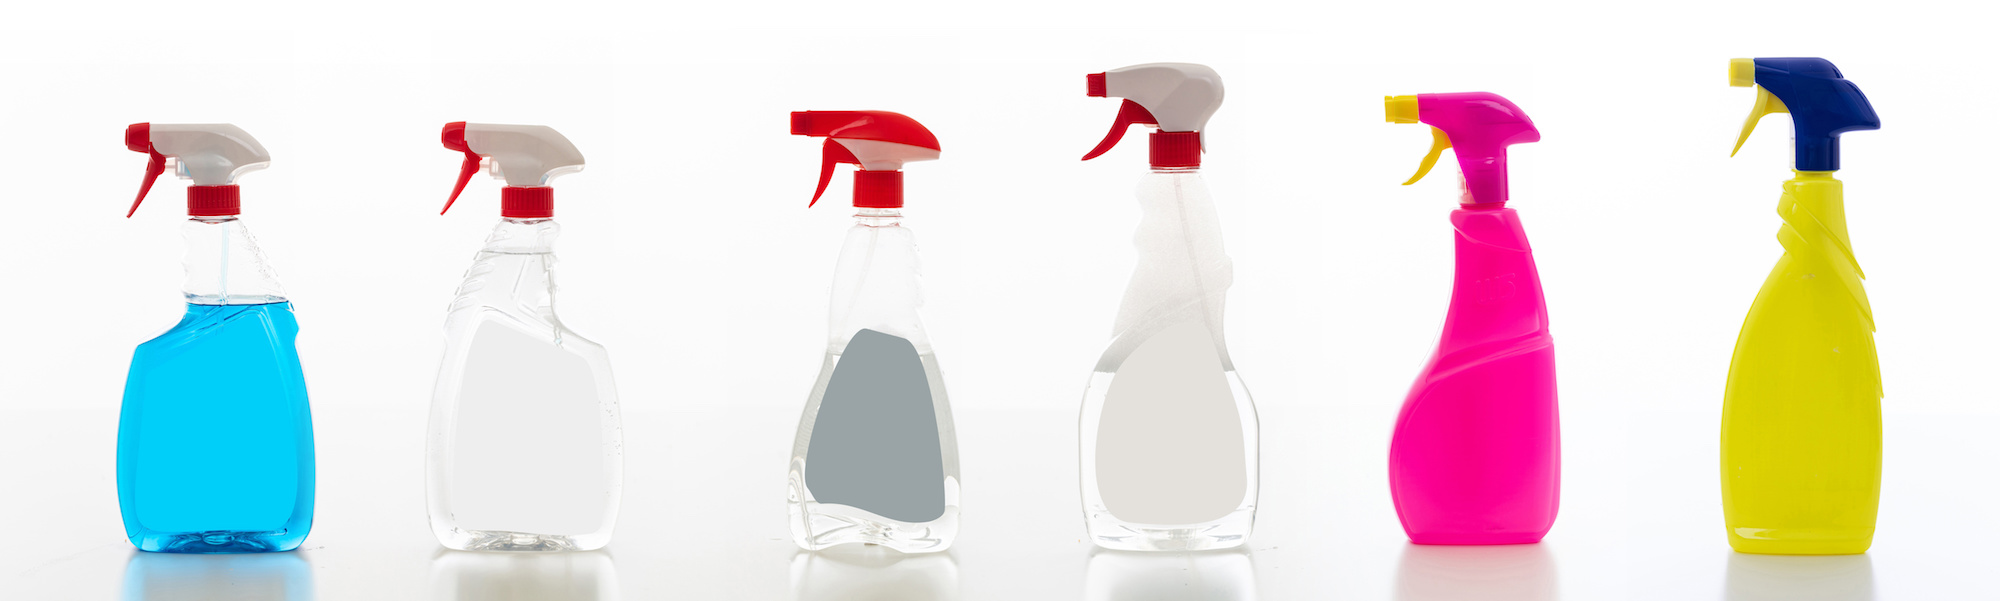 Images of multiple cleaning spray bottles.